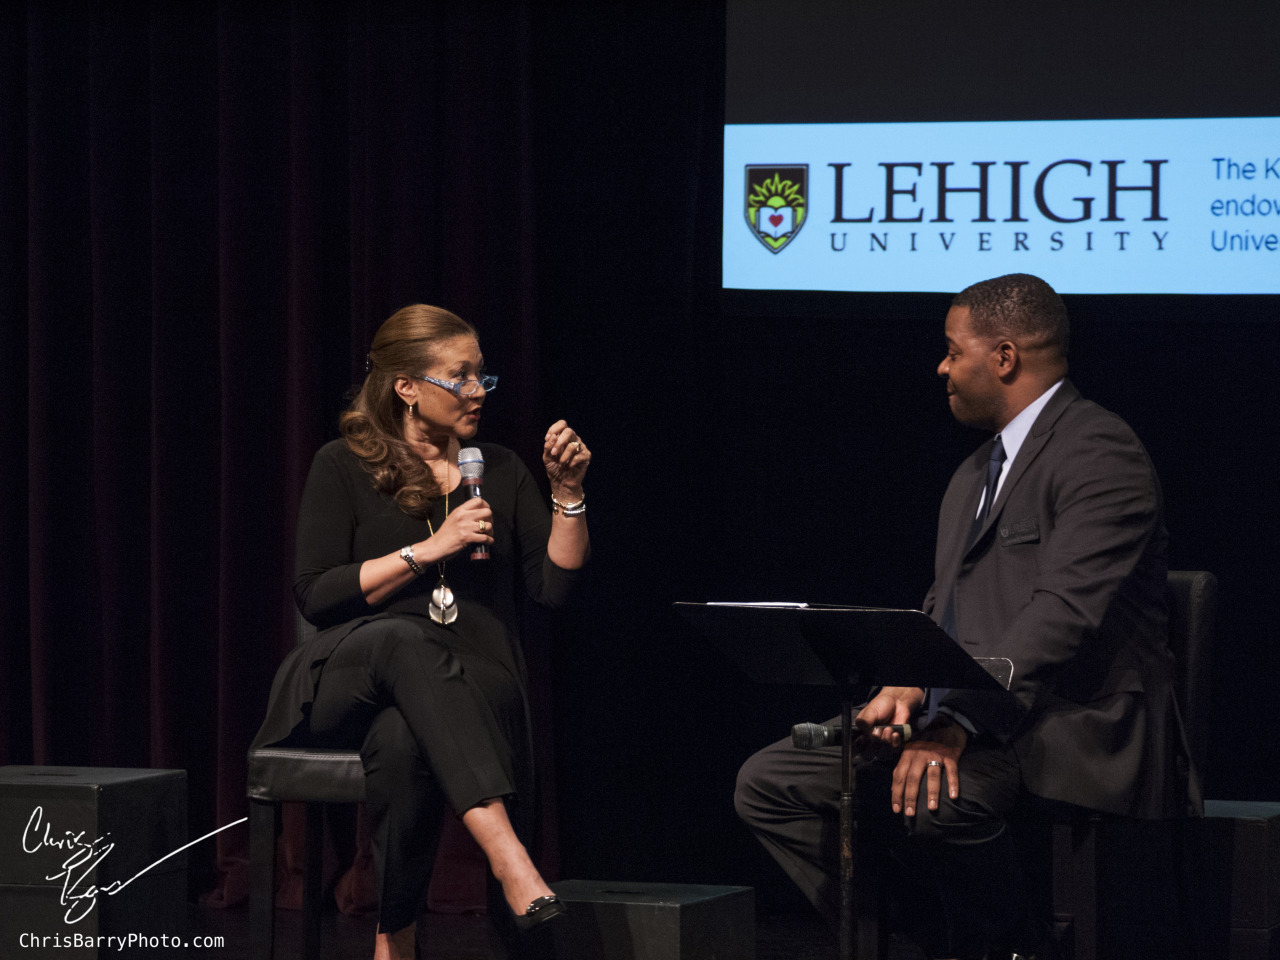 Another photo of Michele Norris speaking with Dr. James Peterson, who began the discussion with Michele Norris about race